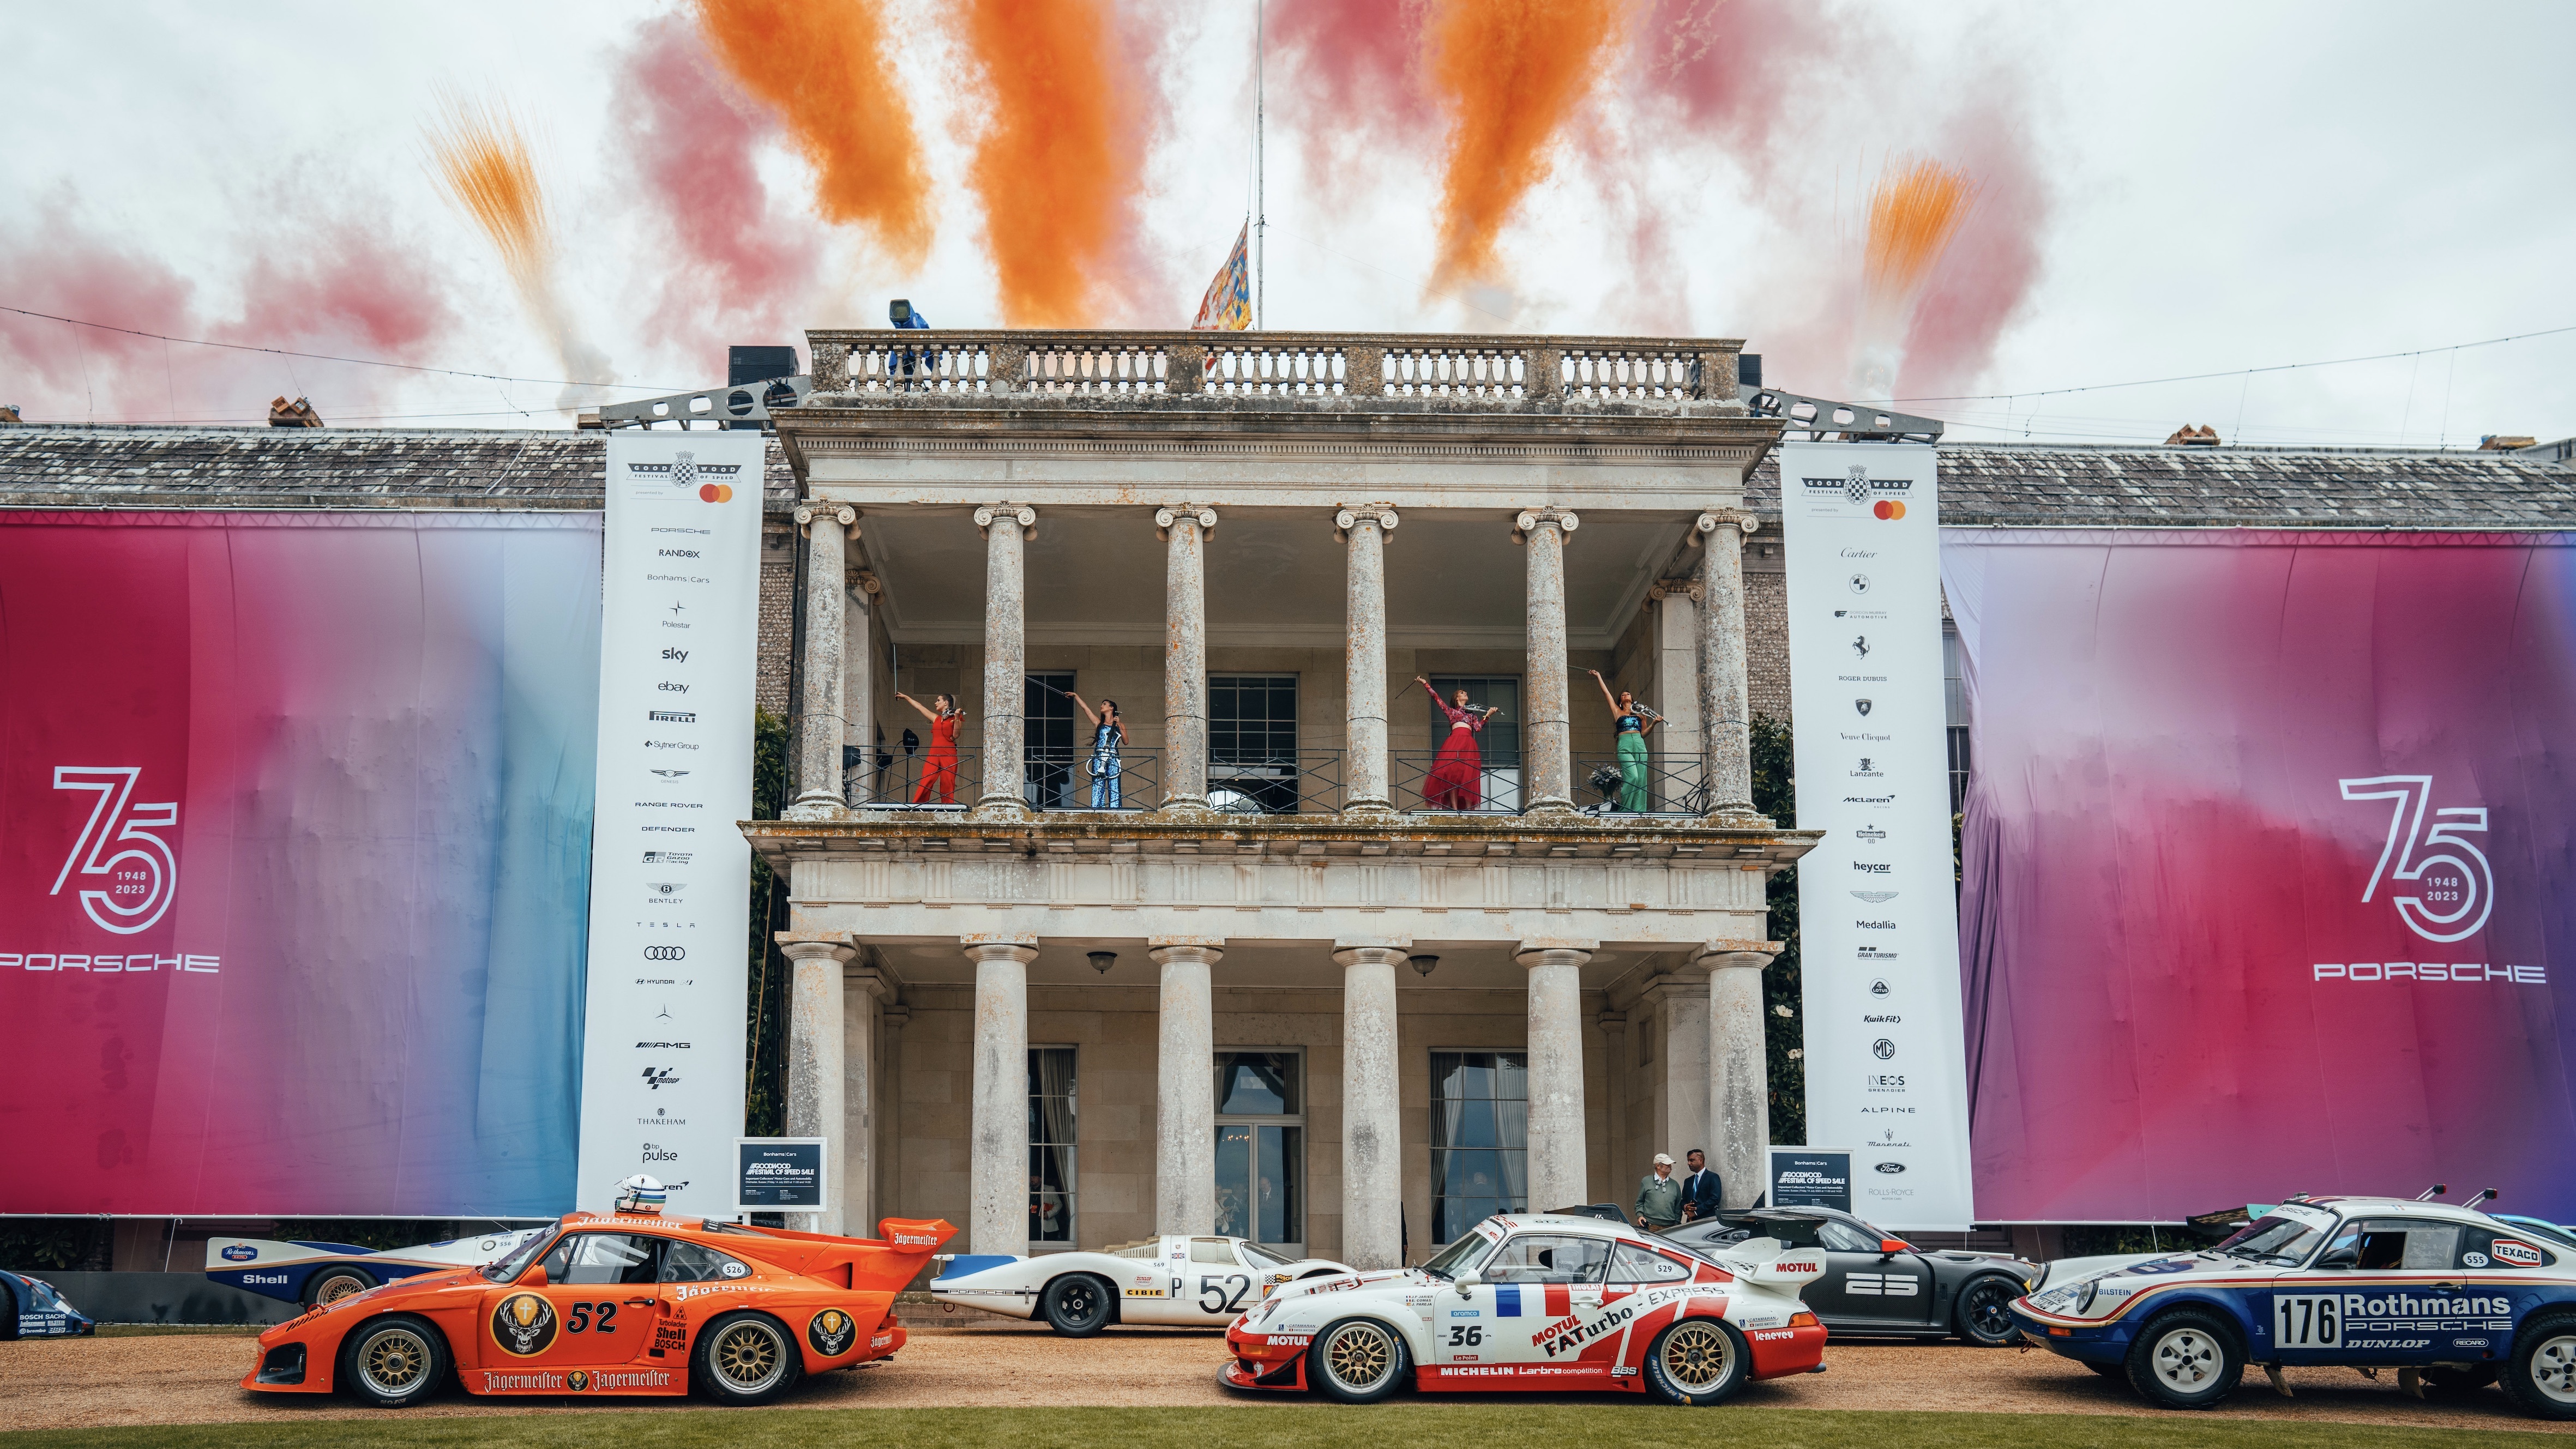 Porsche celebration with race cars at Goodwood Festival of Speed